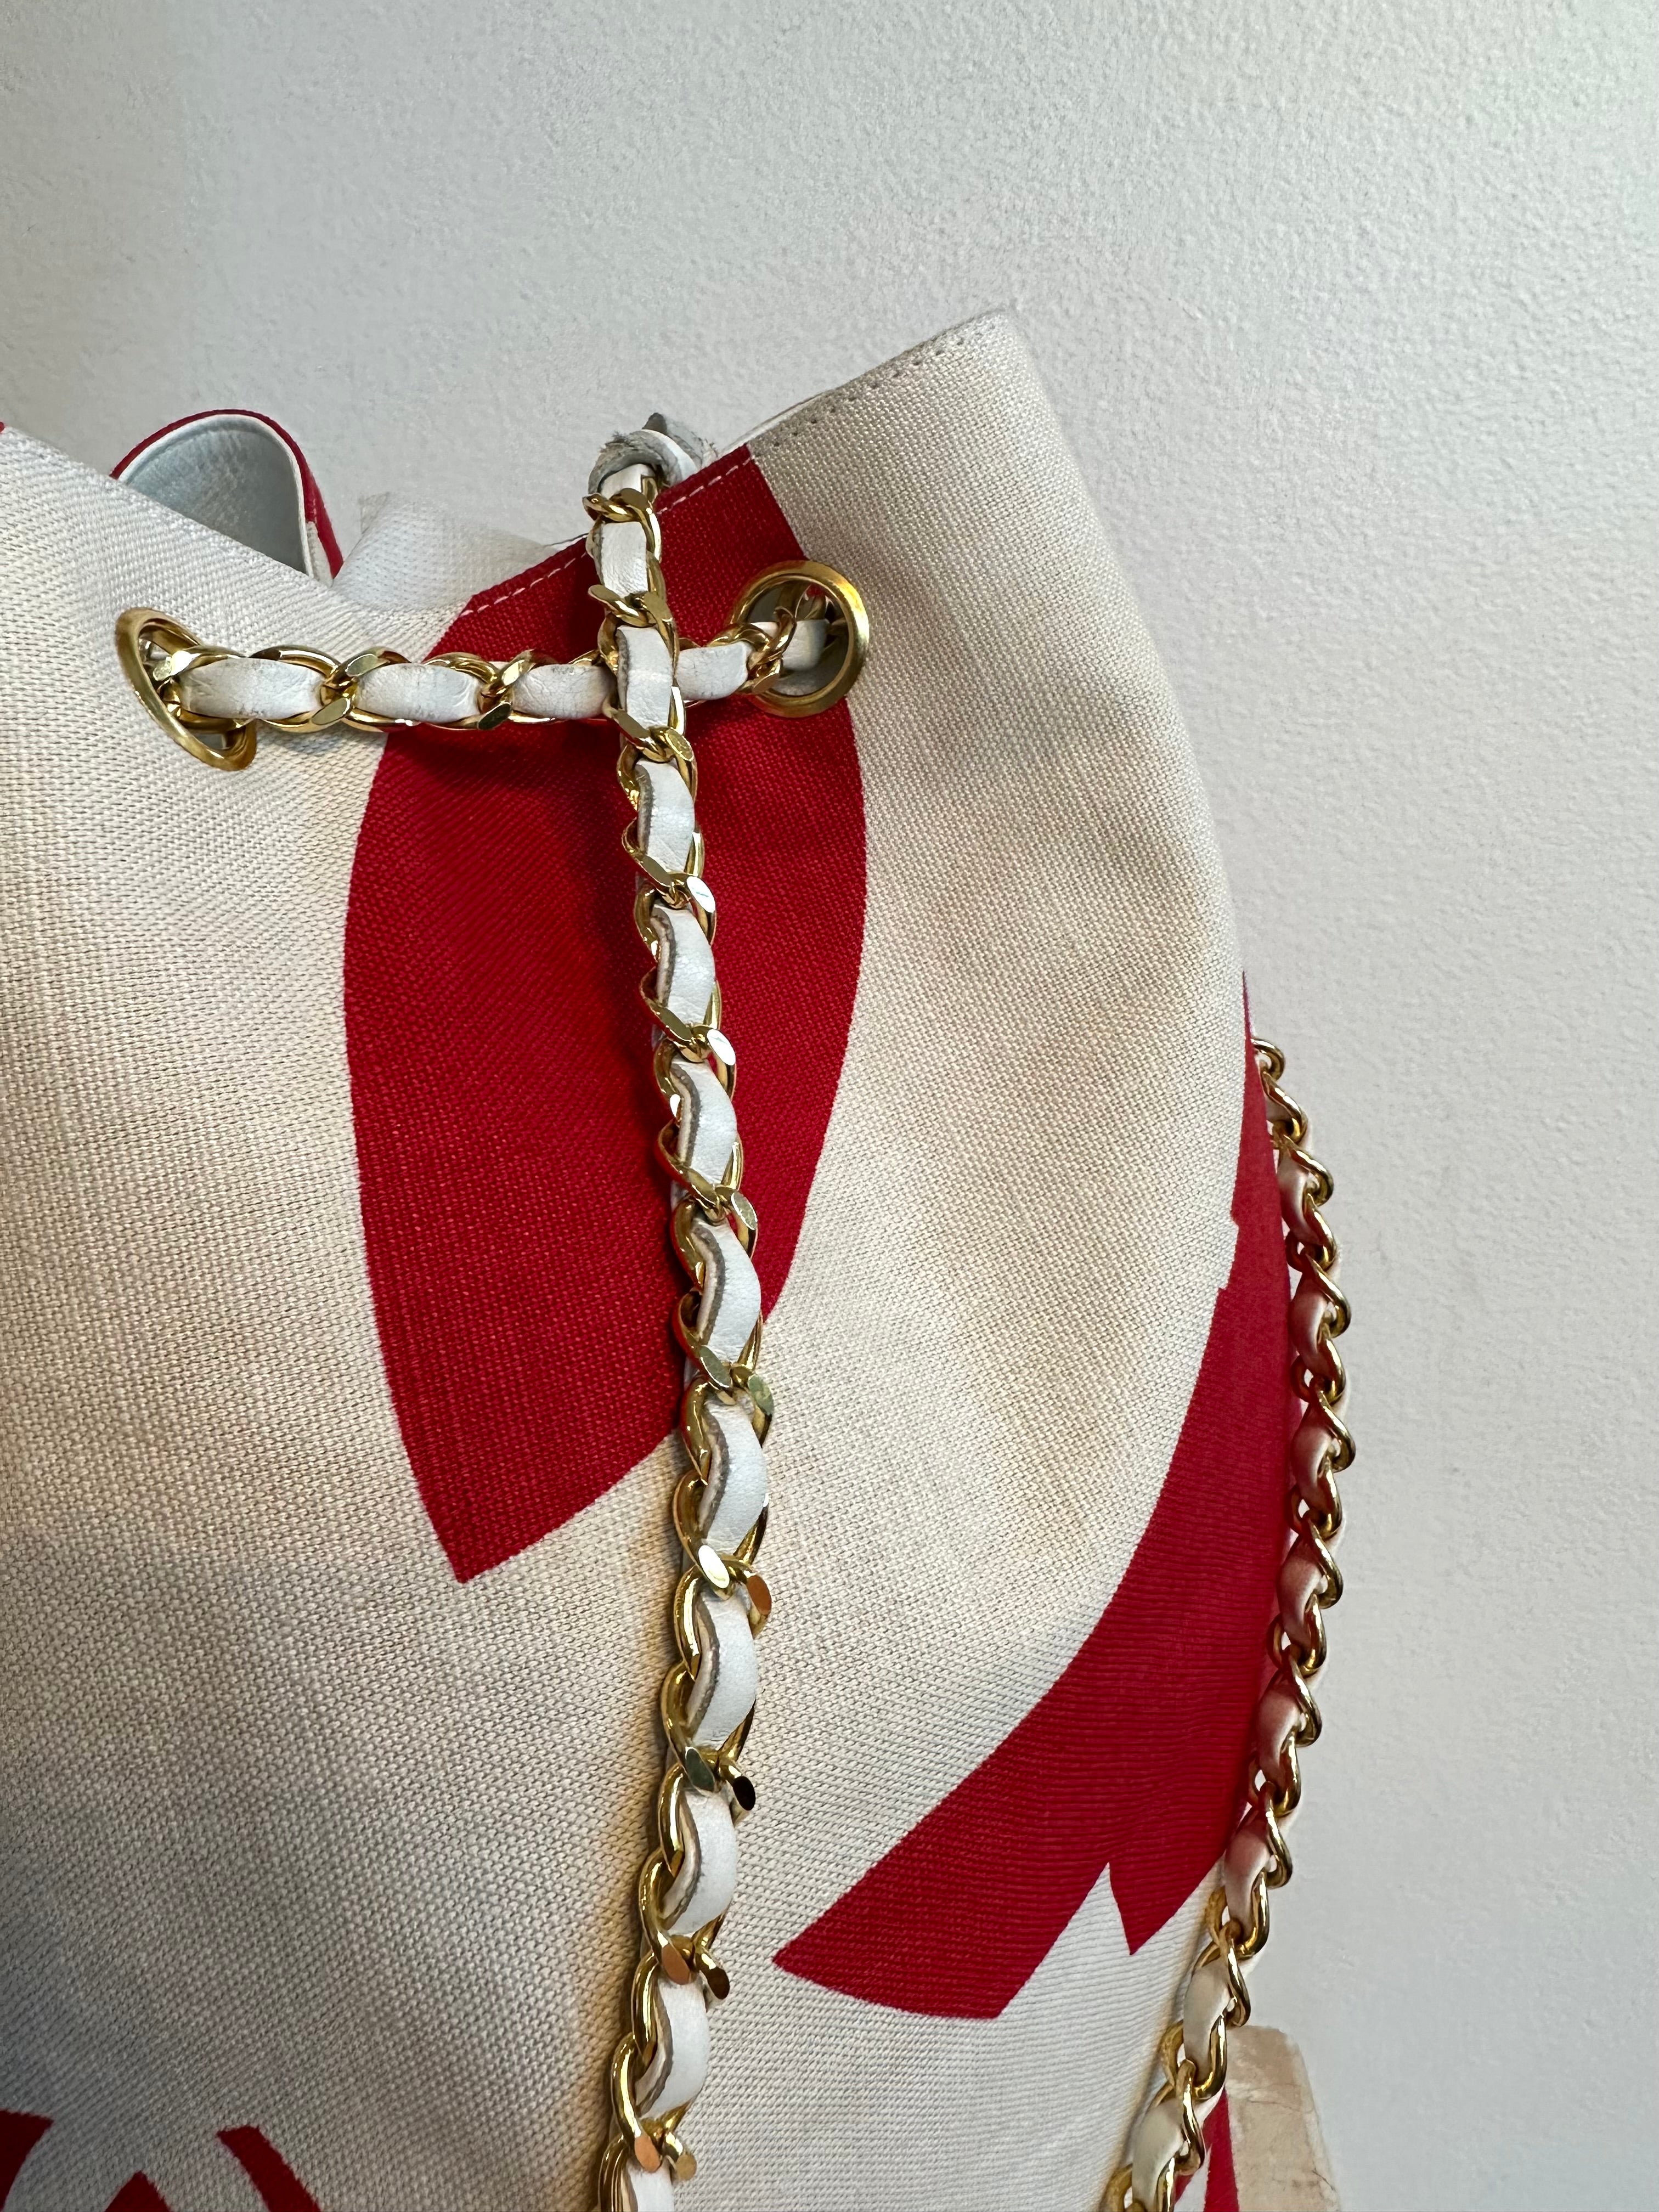 Pre-Owned CHANEL Vintage Red and White Canvas Beach Bag